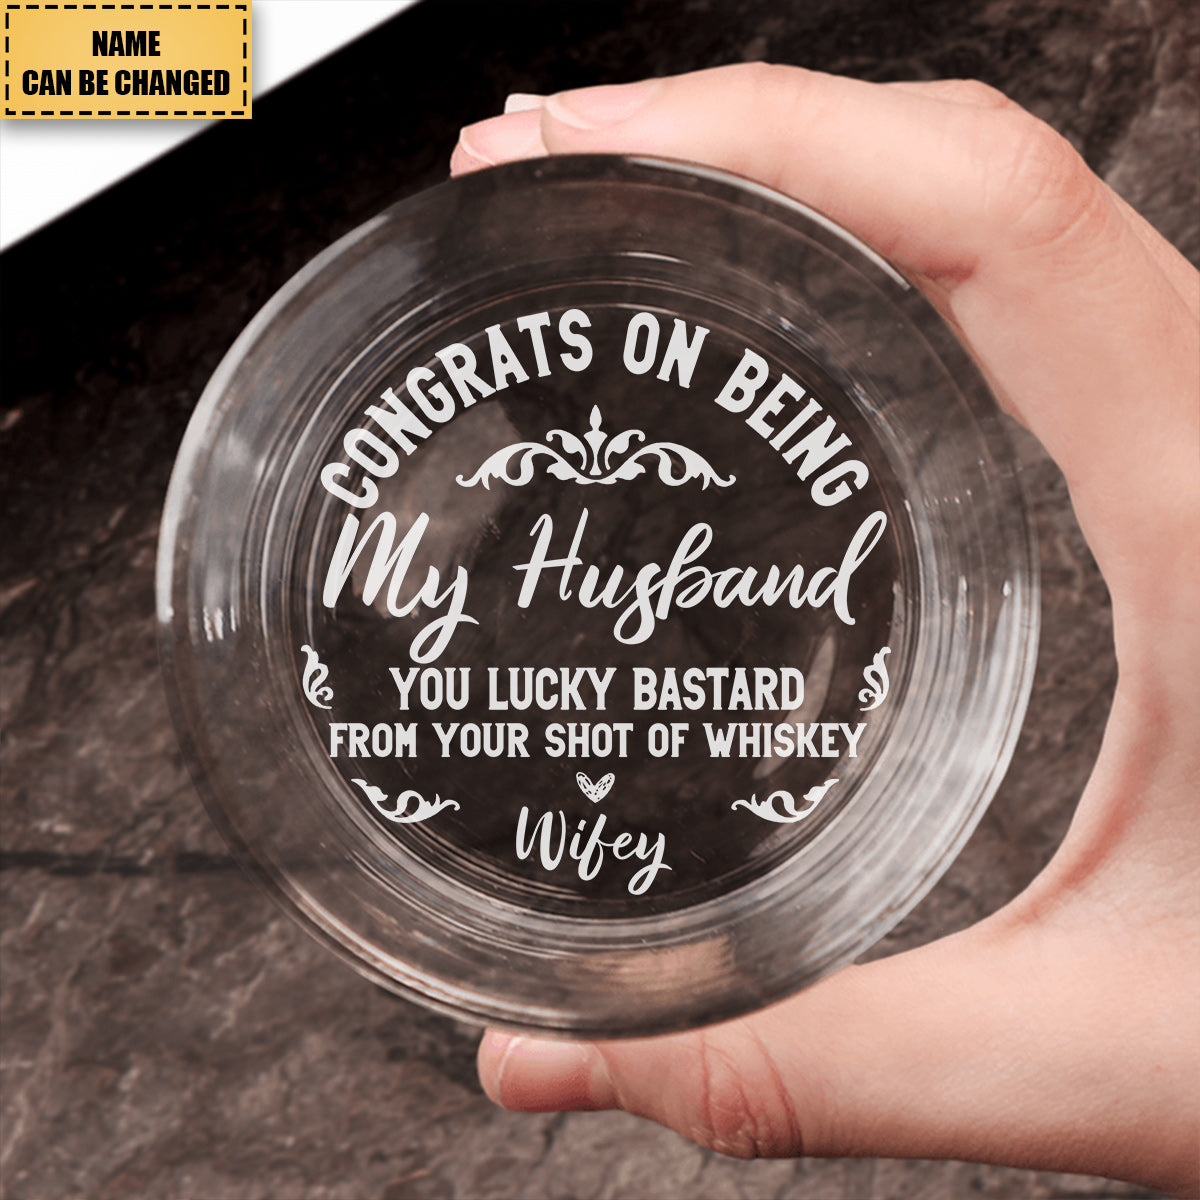 Congrats On Being My Husband - Personalized Engraved Whiskey Glass